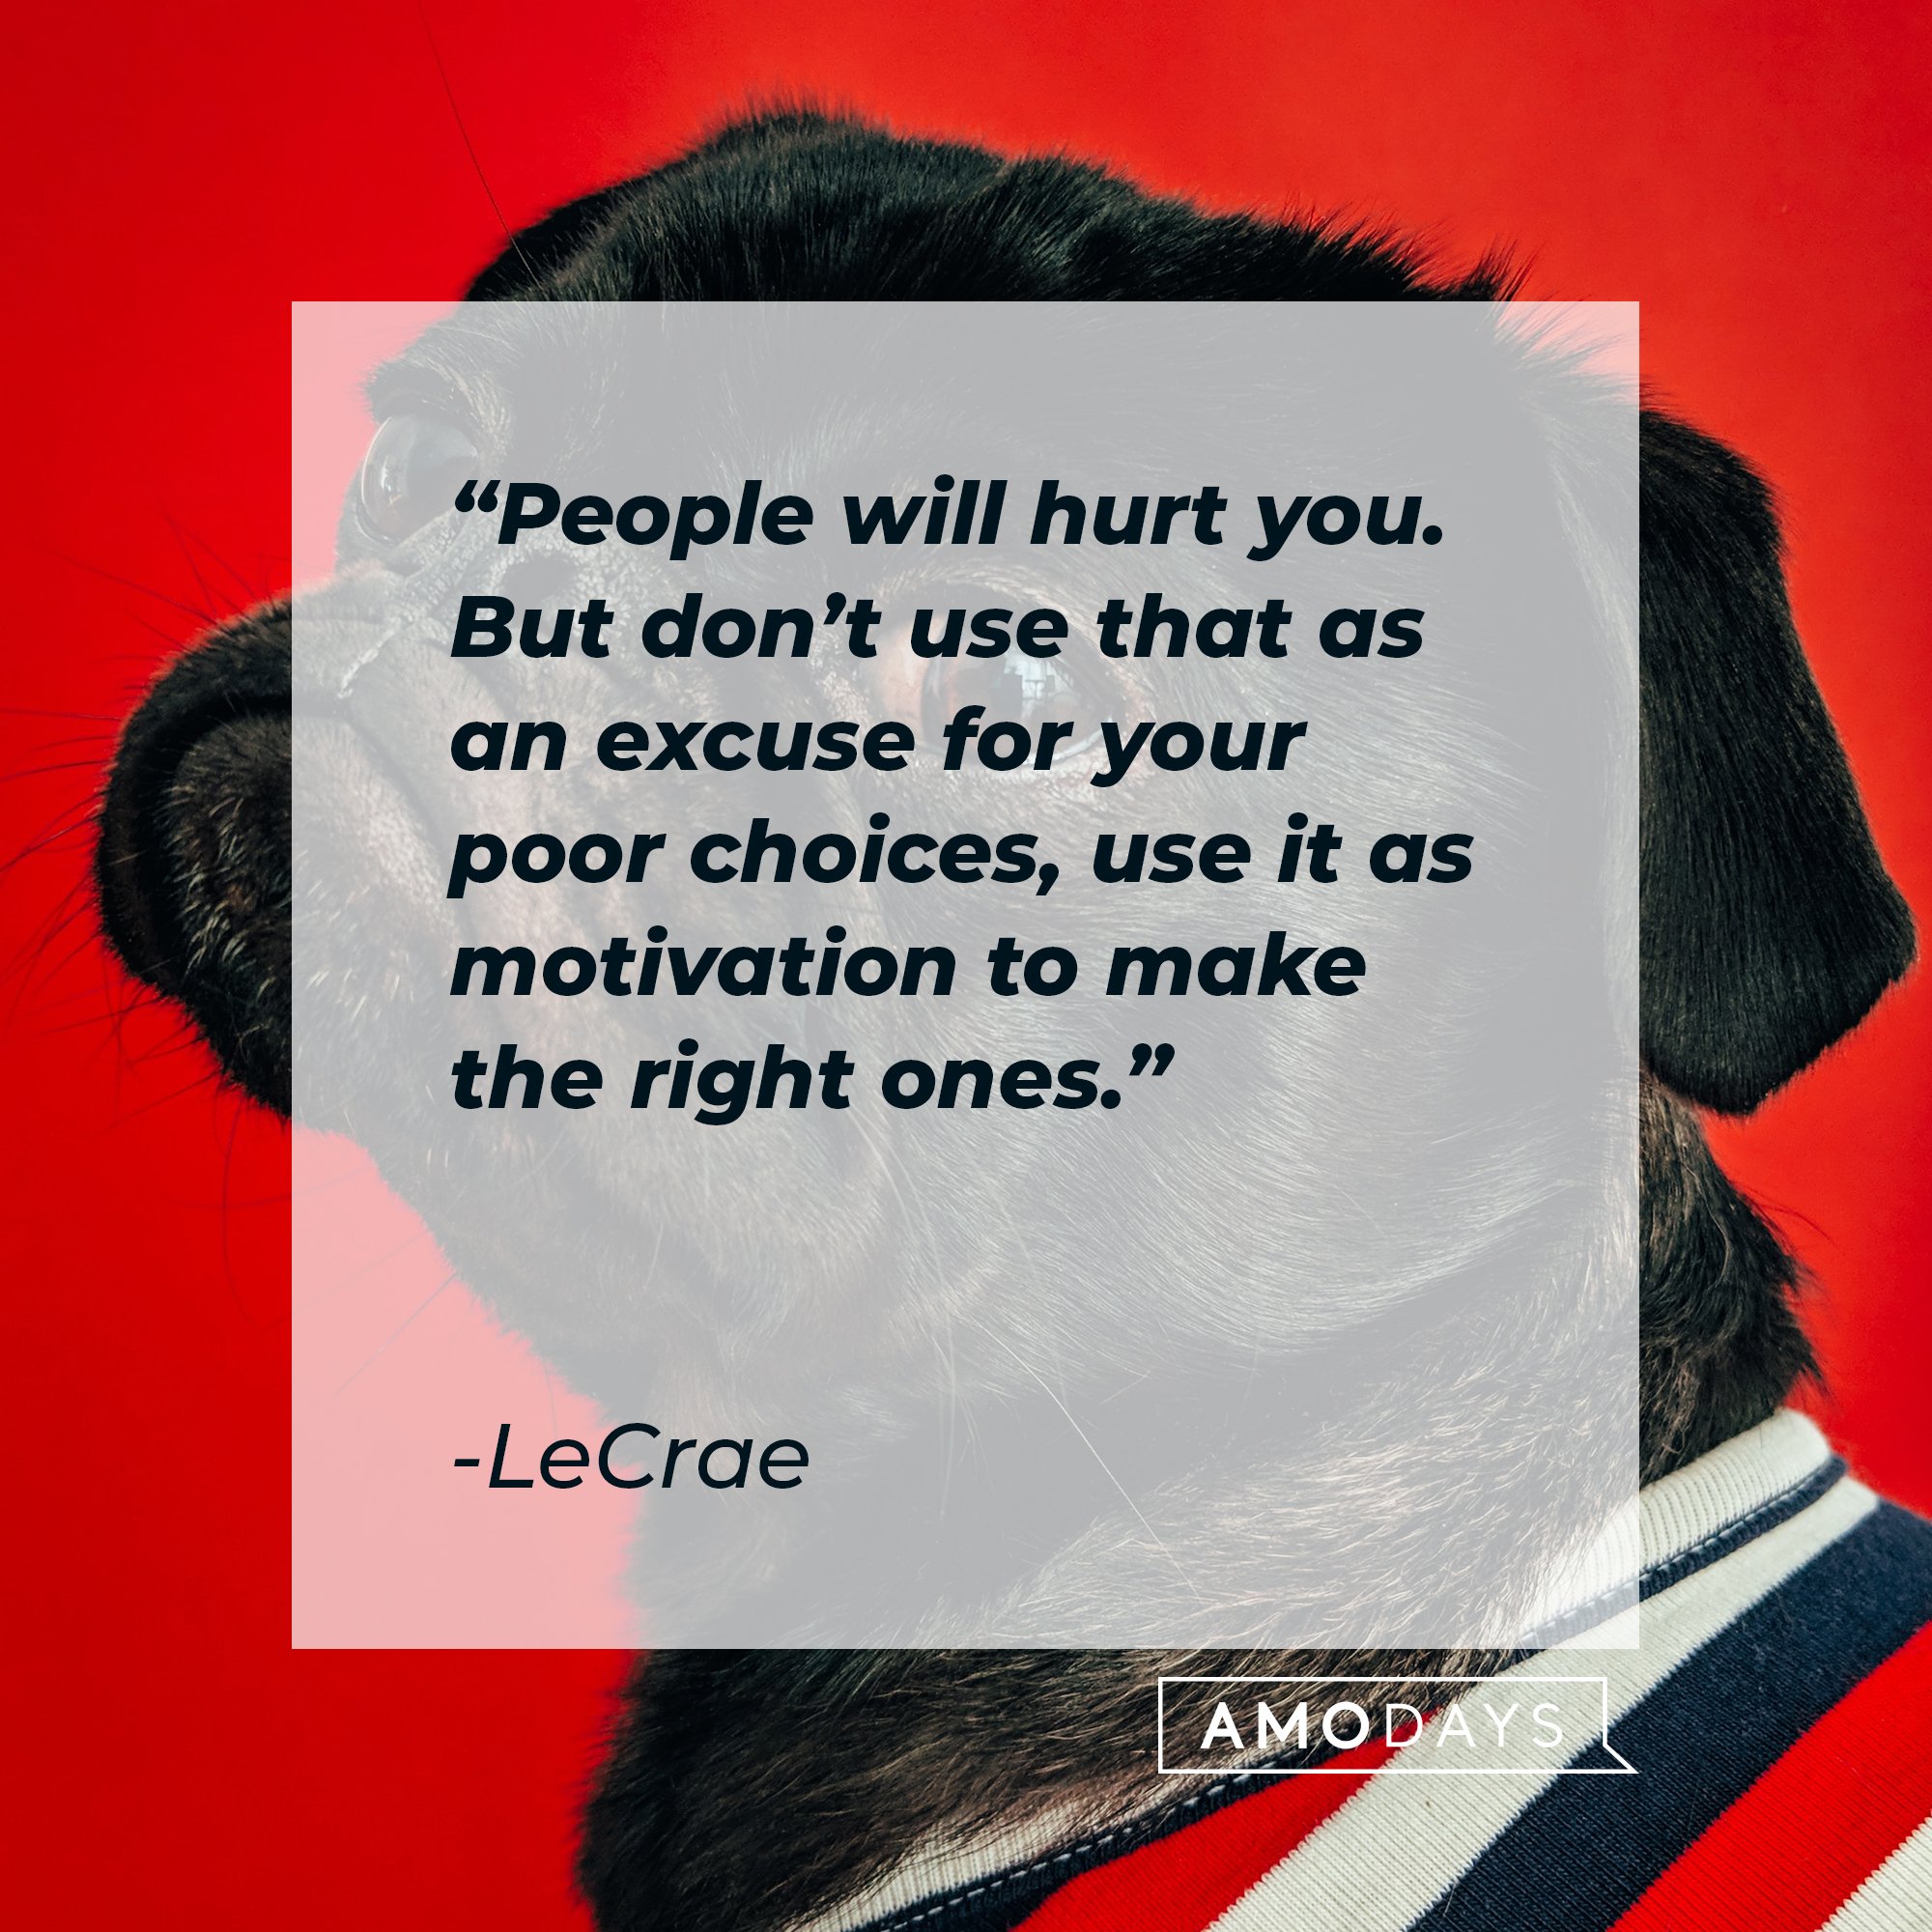 LeCrae's quote: "People will hurt you. But don’t use that as an excuse for your poor choices, use it as motivation to make the right ones." | Image: AmoDays